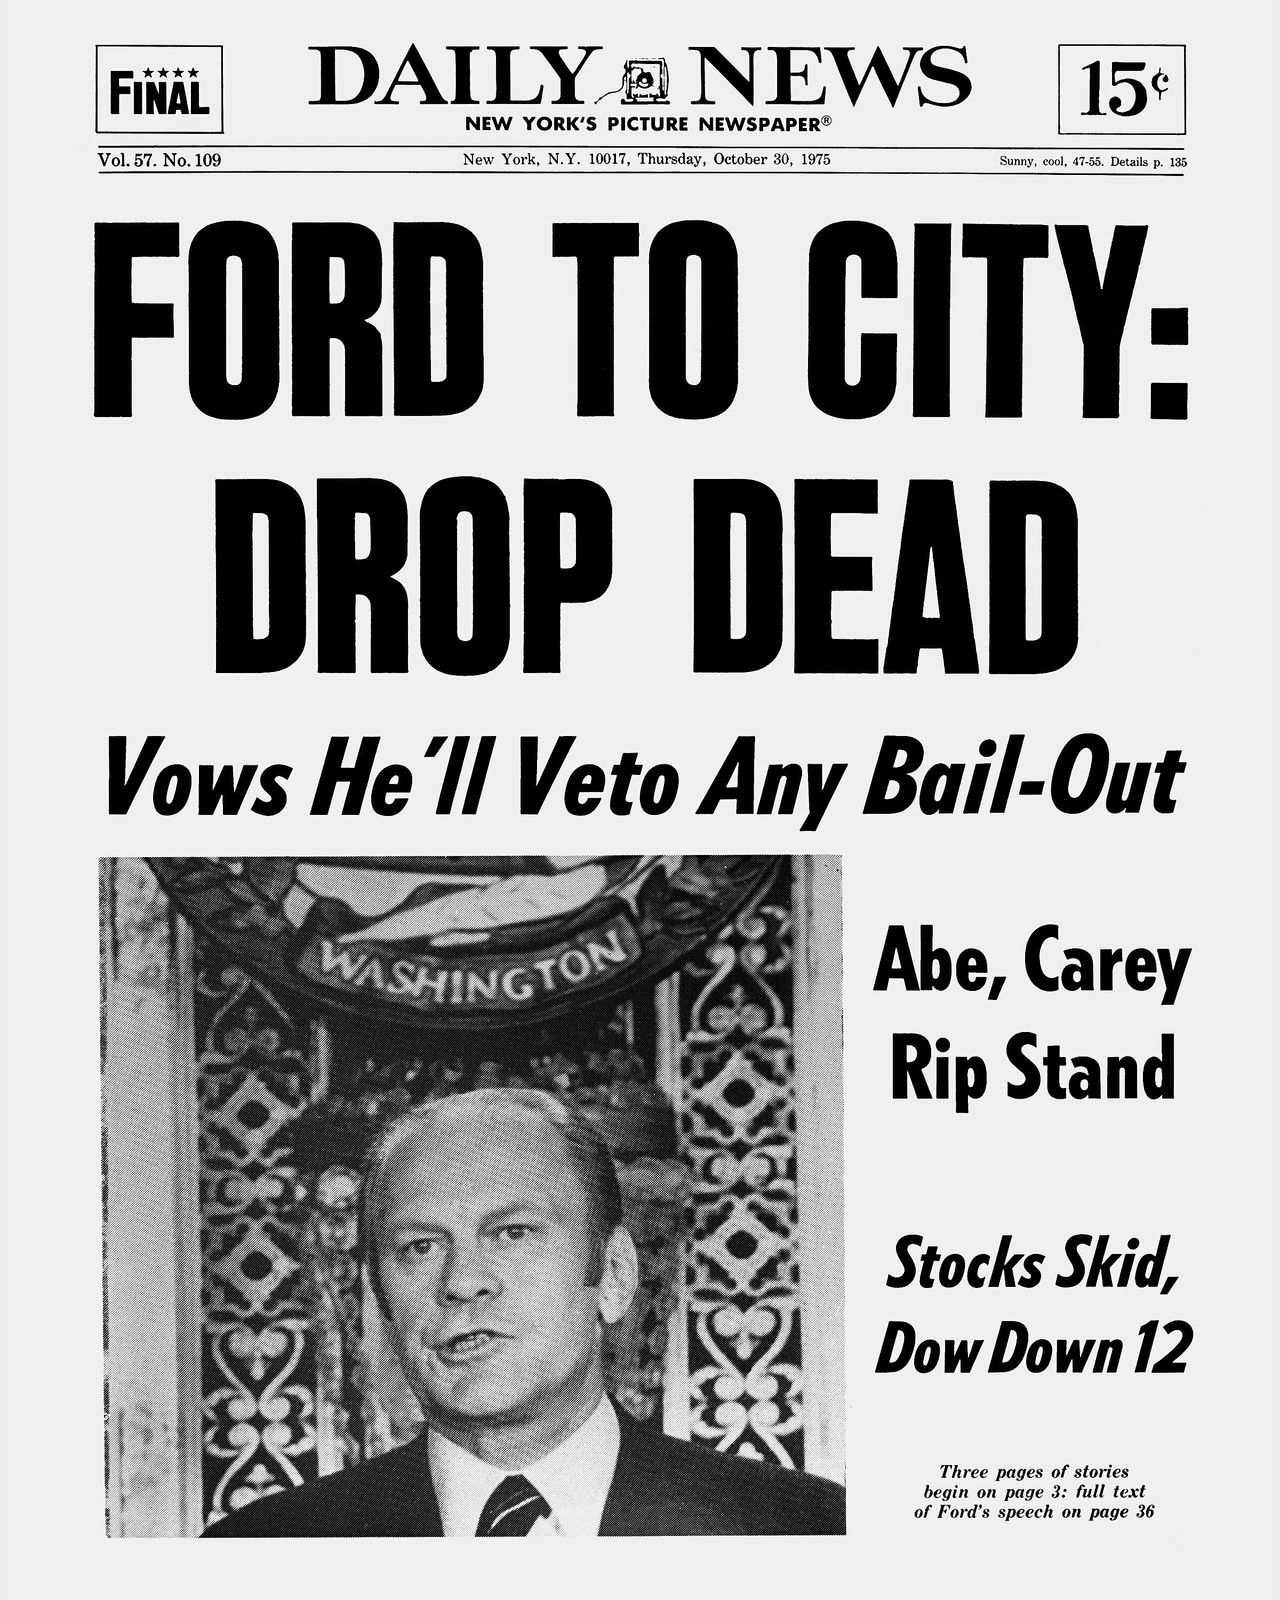 The New York Daily News front page on Oct. 30, 1975, slammed President Gerald Ford's vow to veto federal aid for New York City.